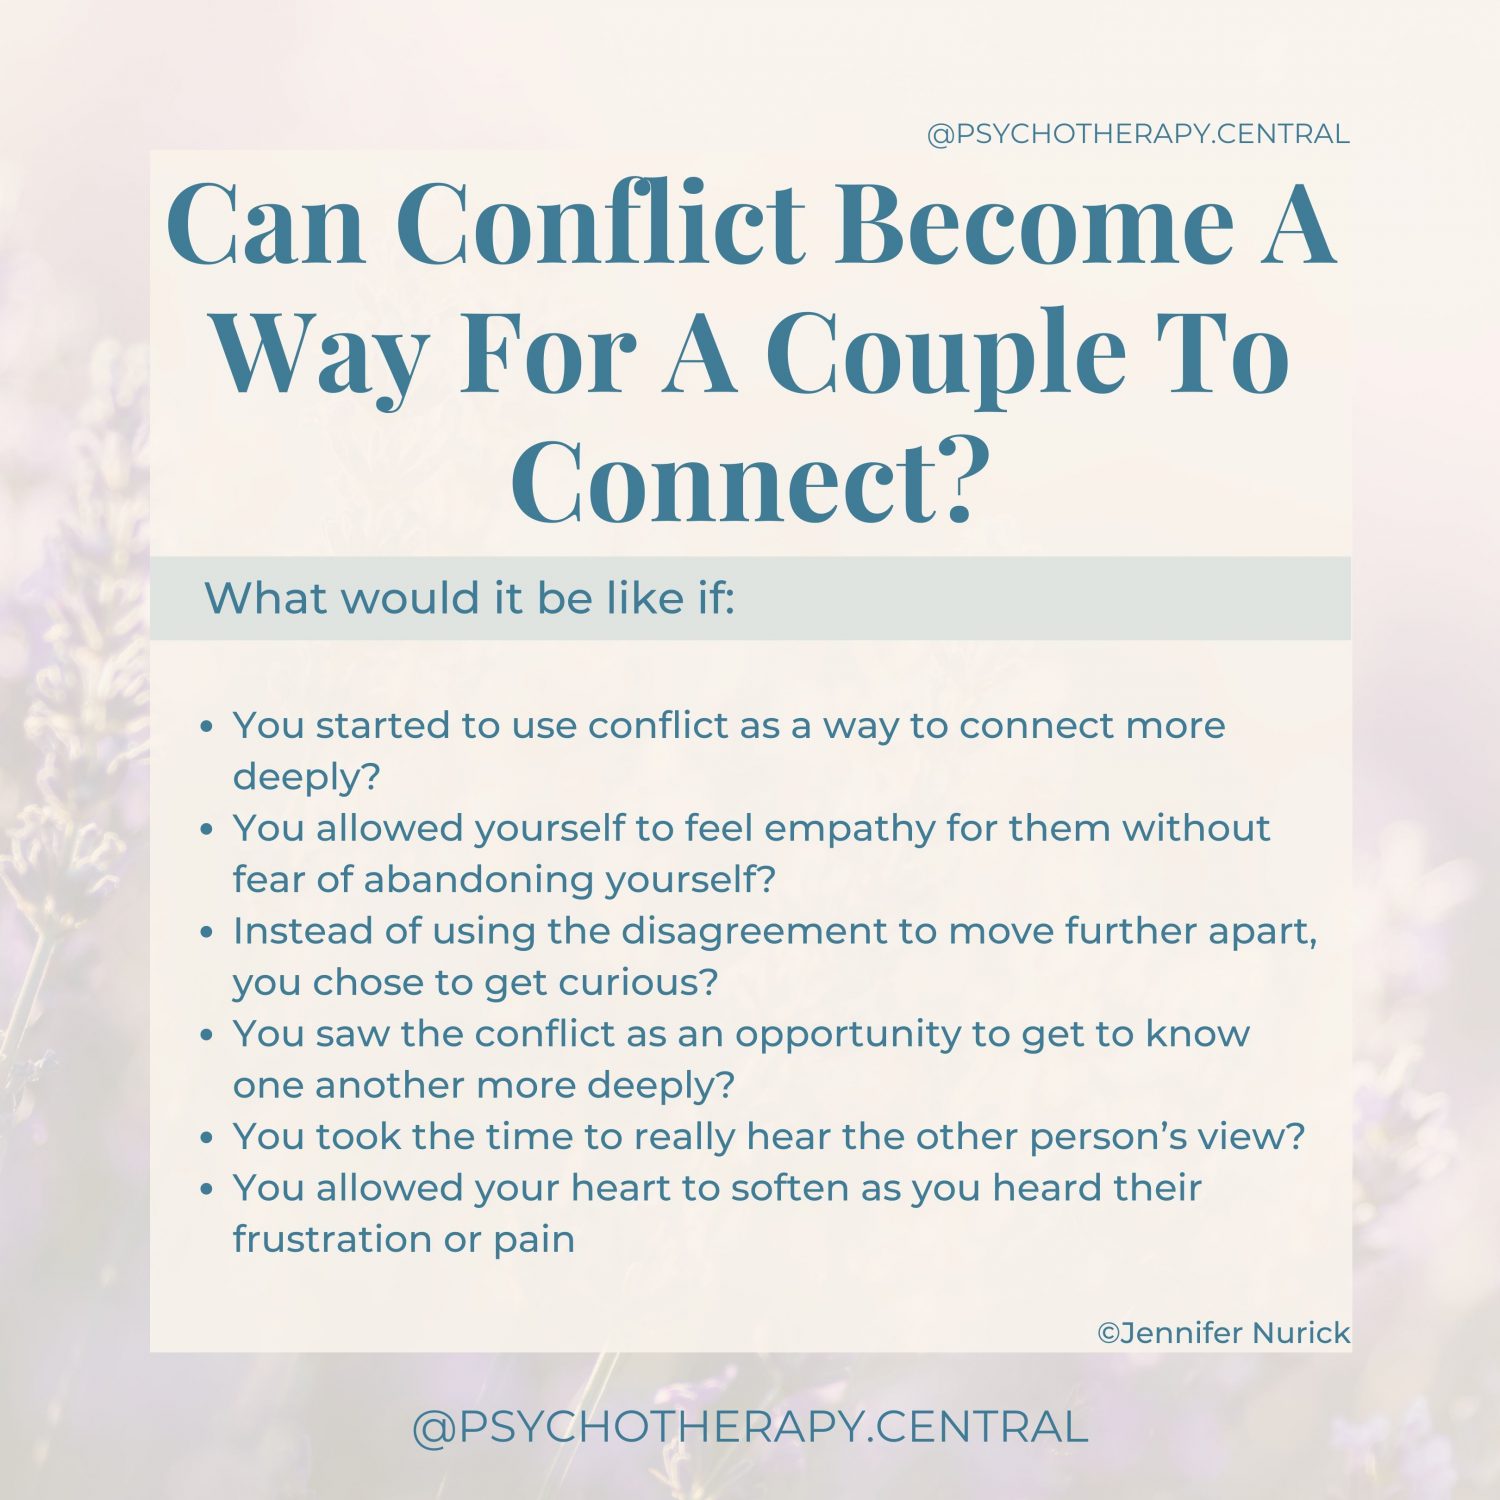 Can Conflict Become A Way For a Couple To Connect? What would it be like if: You started to use conflict as a way to connect more deeply? Instead of using the disagreement to move further apart, you chose to get curious? You saw the conflict as an opportunity to get to know one another more deeply? You took the time to really hear the other person’s view? You allowed yourself to feel empathy for them without fear of abandoning yourself? You allowed your heart to soften as you hear their frustration or pain You allowed the conflict to be an avenue through which you can know your partner more intimately? When in conflict, you could get curious about yourself and your partner? You could remember that we all have wounds; maybe you are feeling yours now and seeing theirs? Through conflict, you could hold space for one another’s wounds and imperfections without withdrawing?